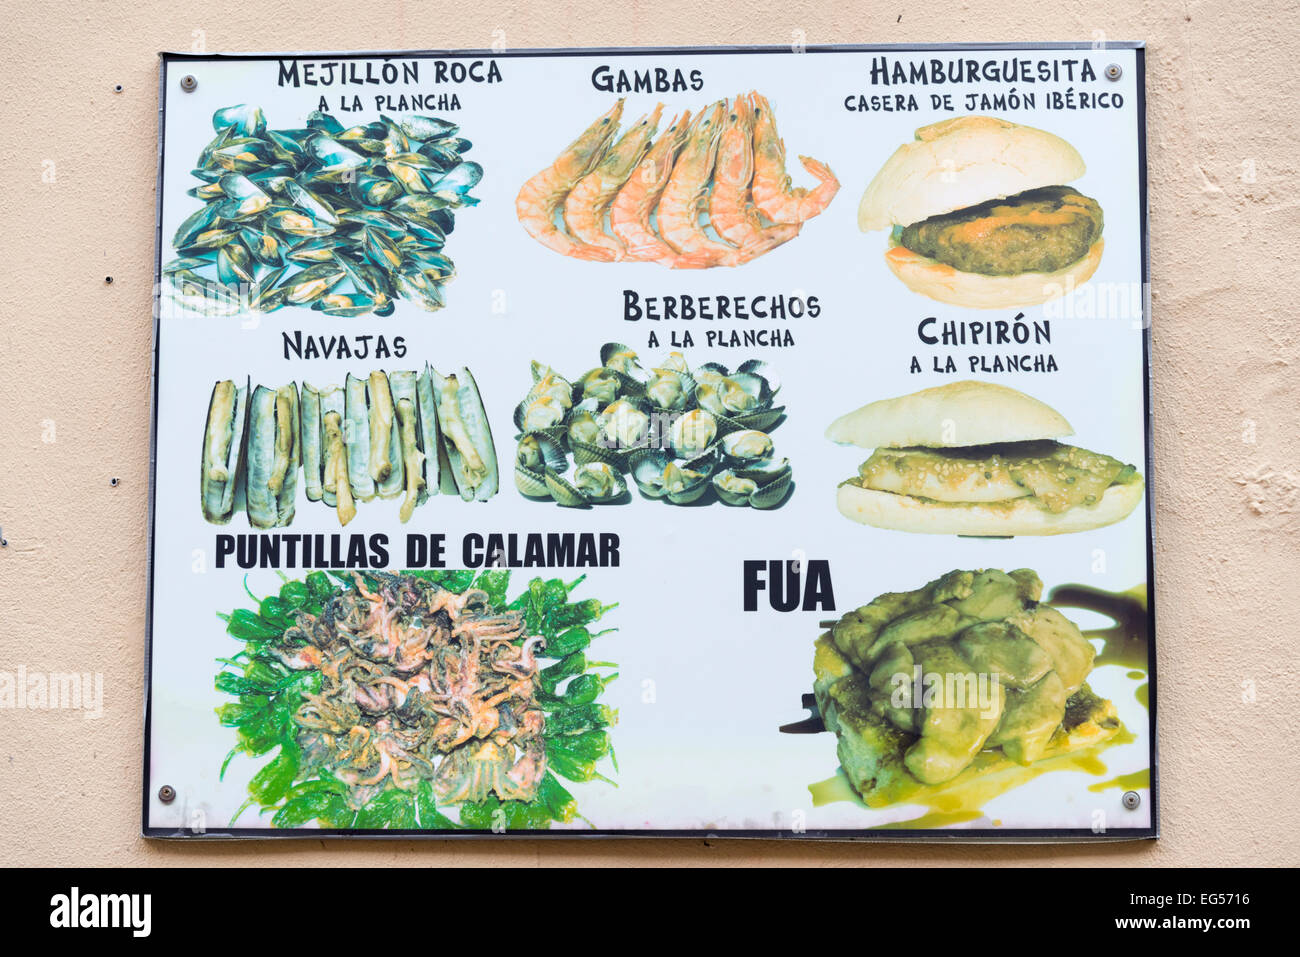 A menu at a spanish restaurant or cafe in Spain with photographs of the food available Stock Photo